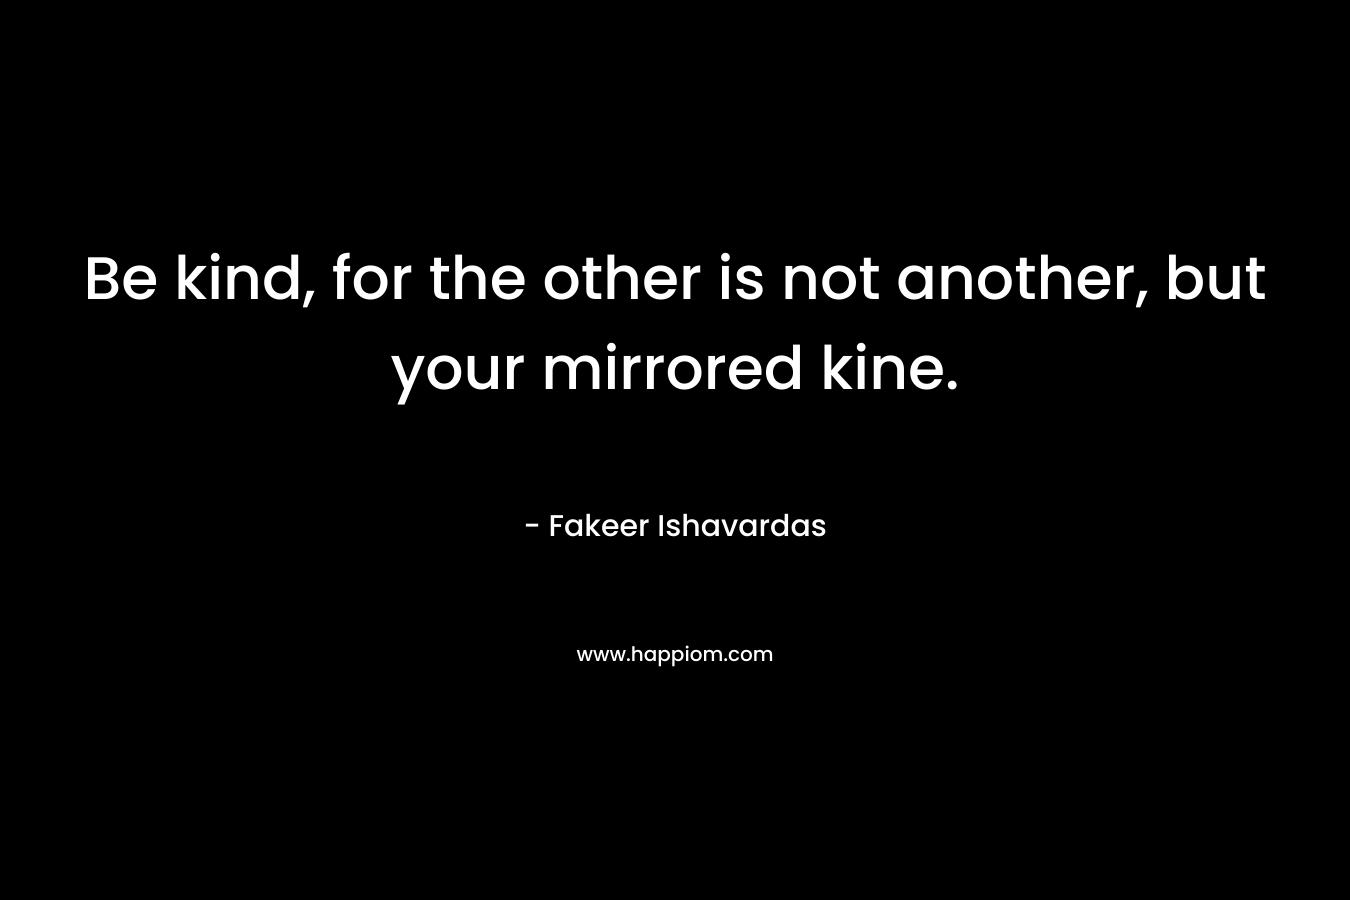 Be kind, for the other is not another, but your mirrored kine. – Fakeer Ishavardas